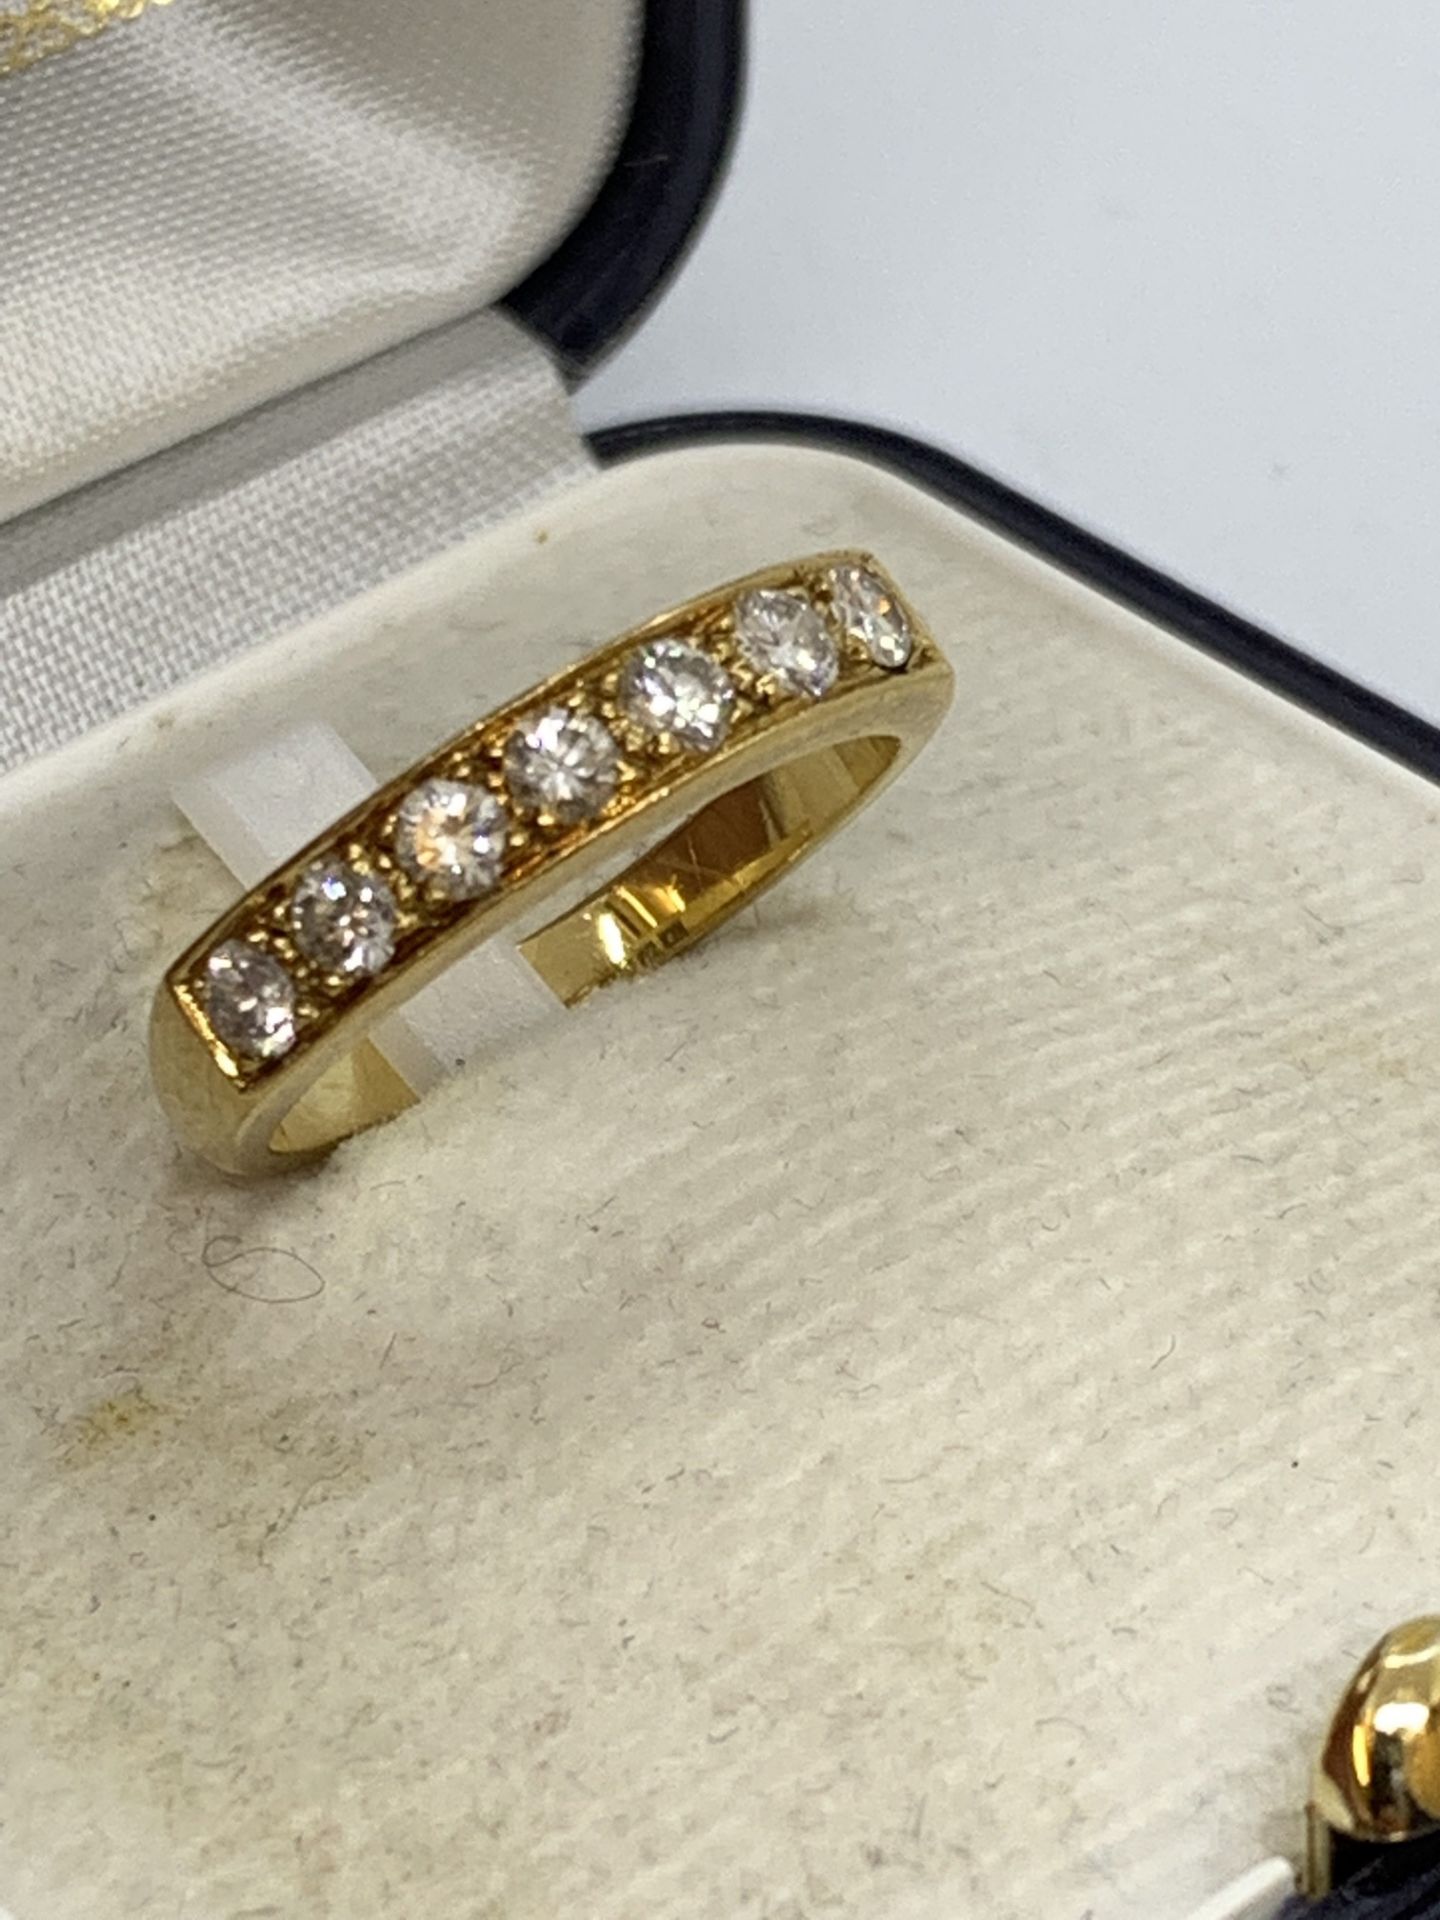 DIAMOND 1/2 ETERNITY RING IN 18ct YELLOW GOLD - 4.1g APPROX - SIZE M APPROX - Image 4 of 8